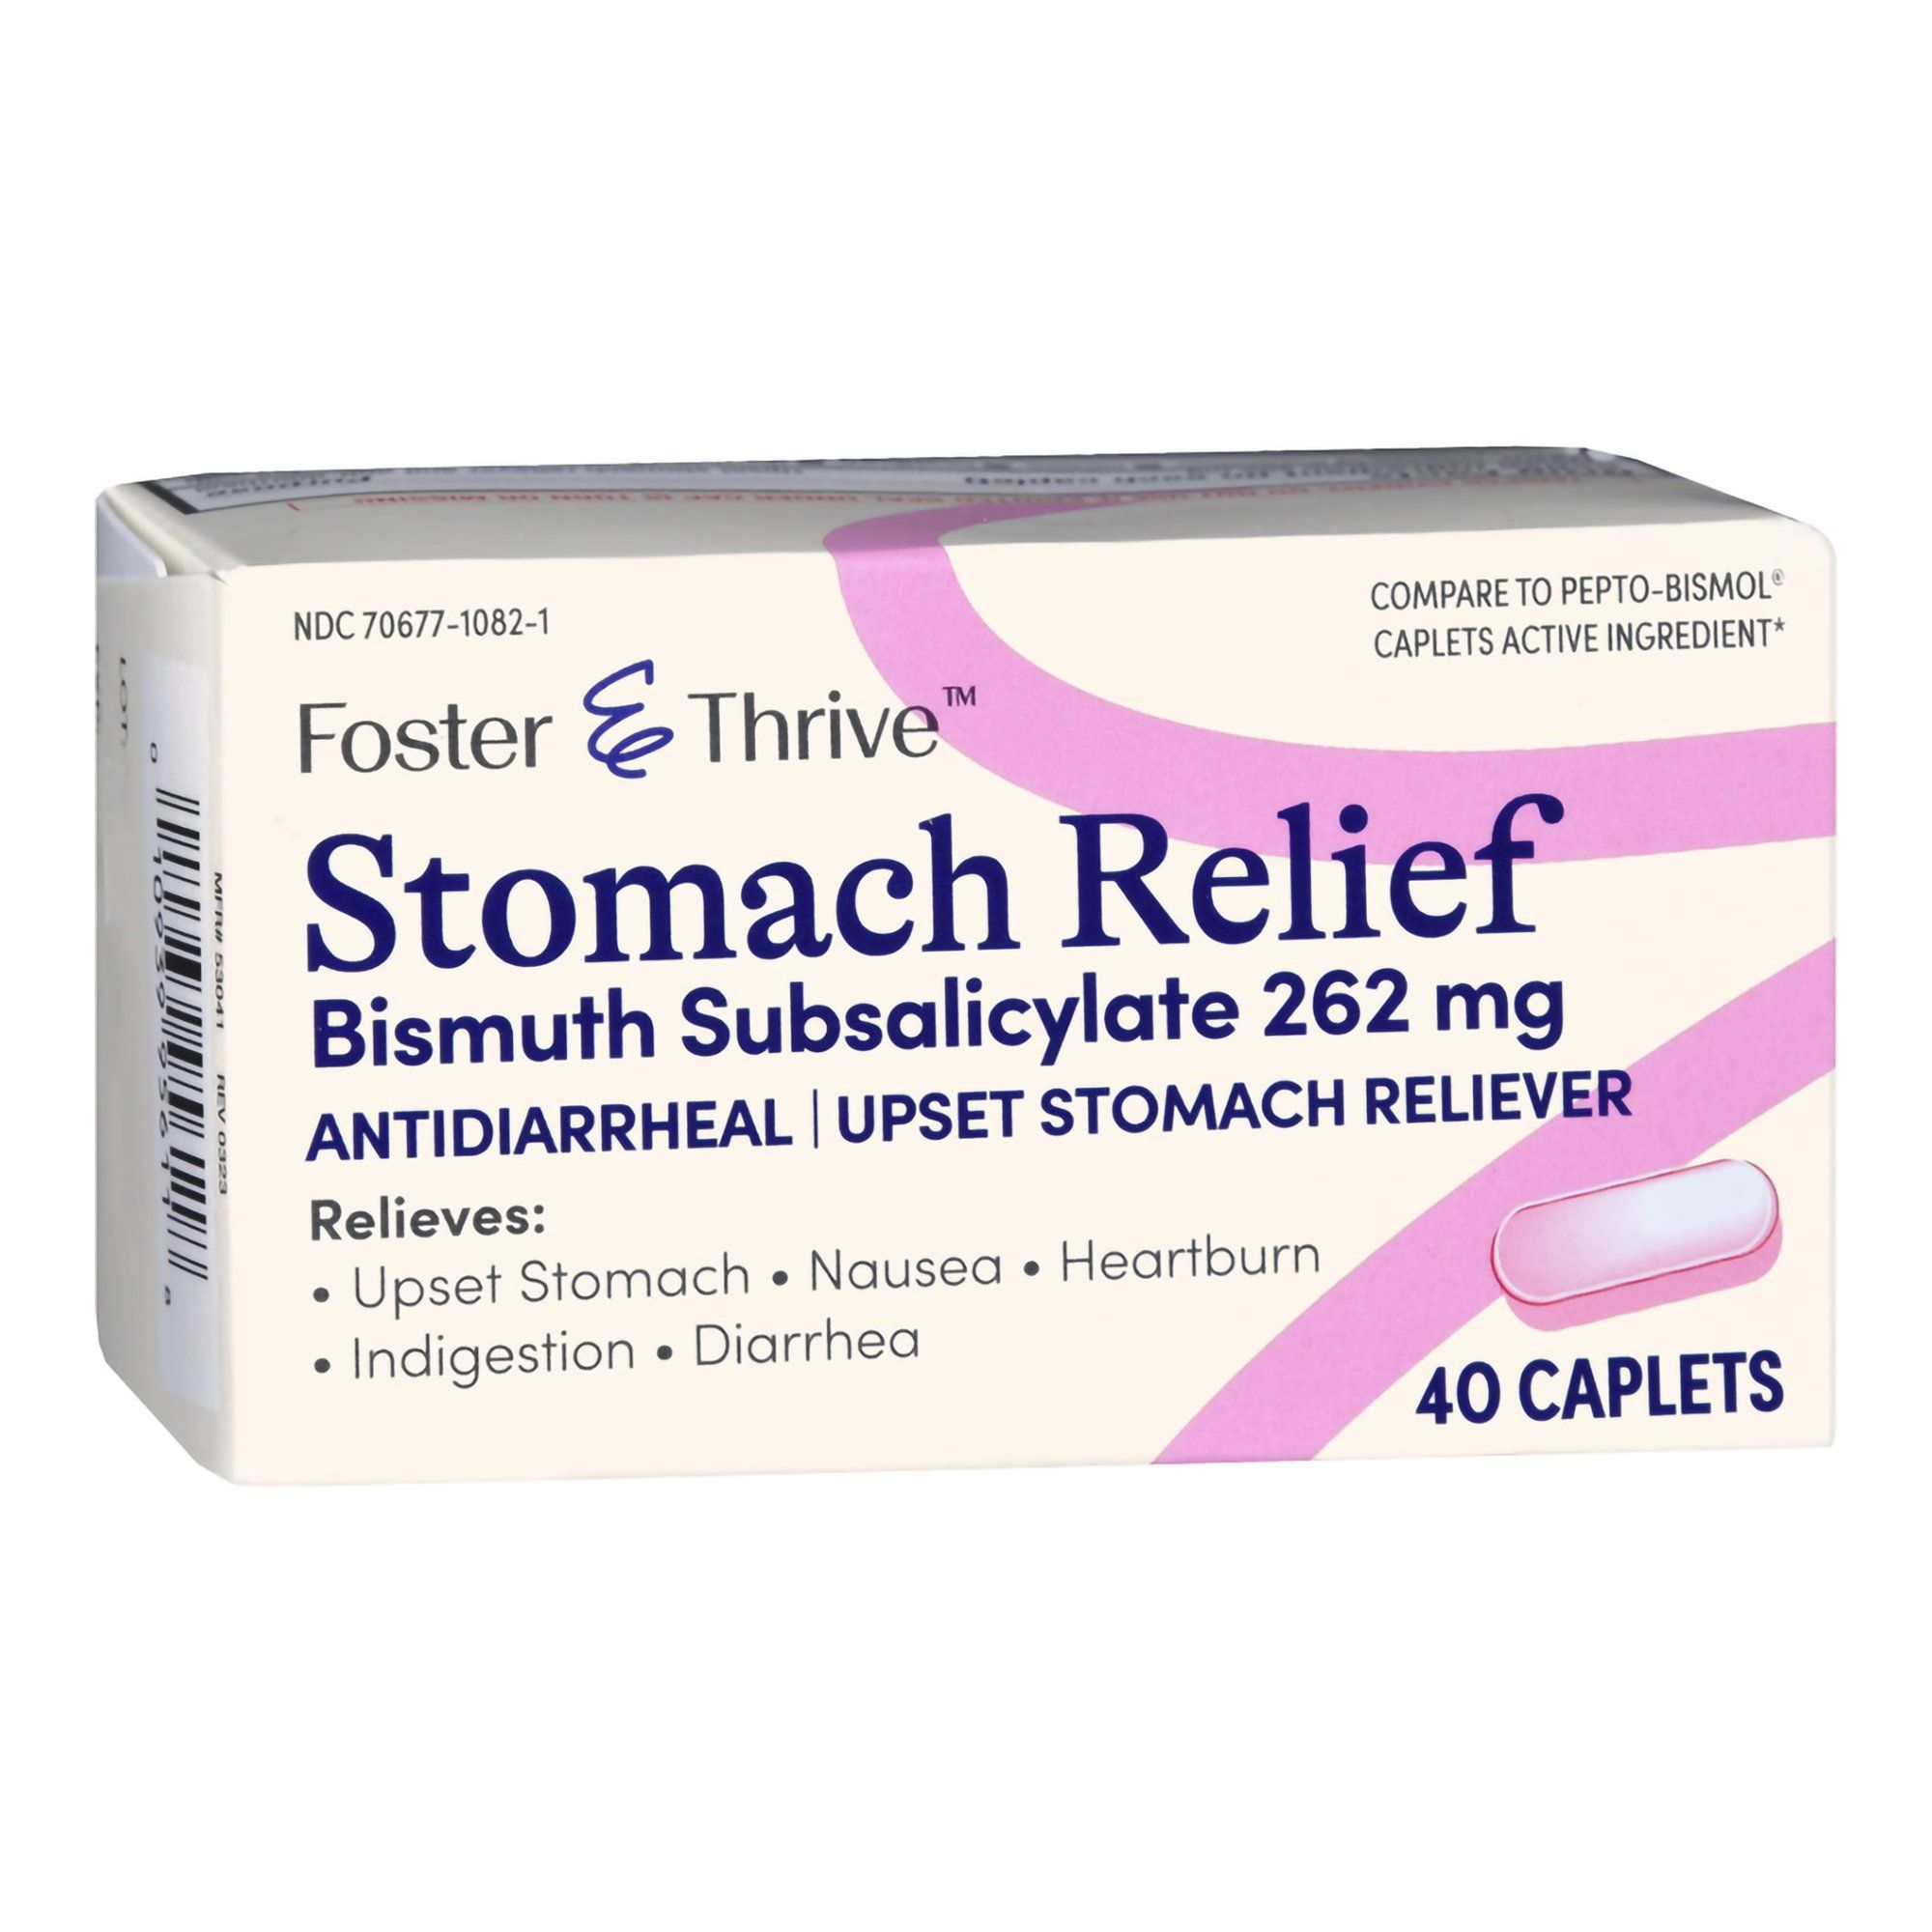 Foster & Thrive Stomach Relief Bismuth Subsalicylate Caplets, 262 mg - 40 ct